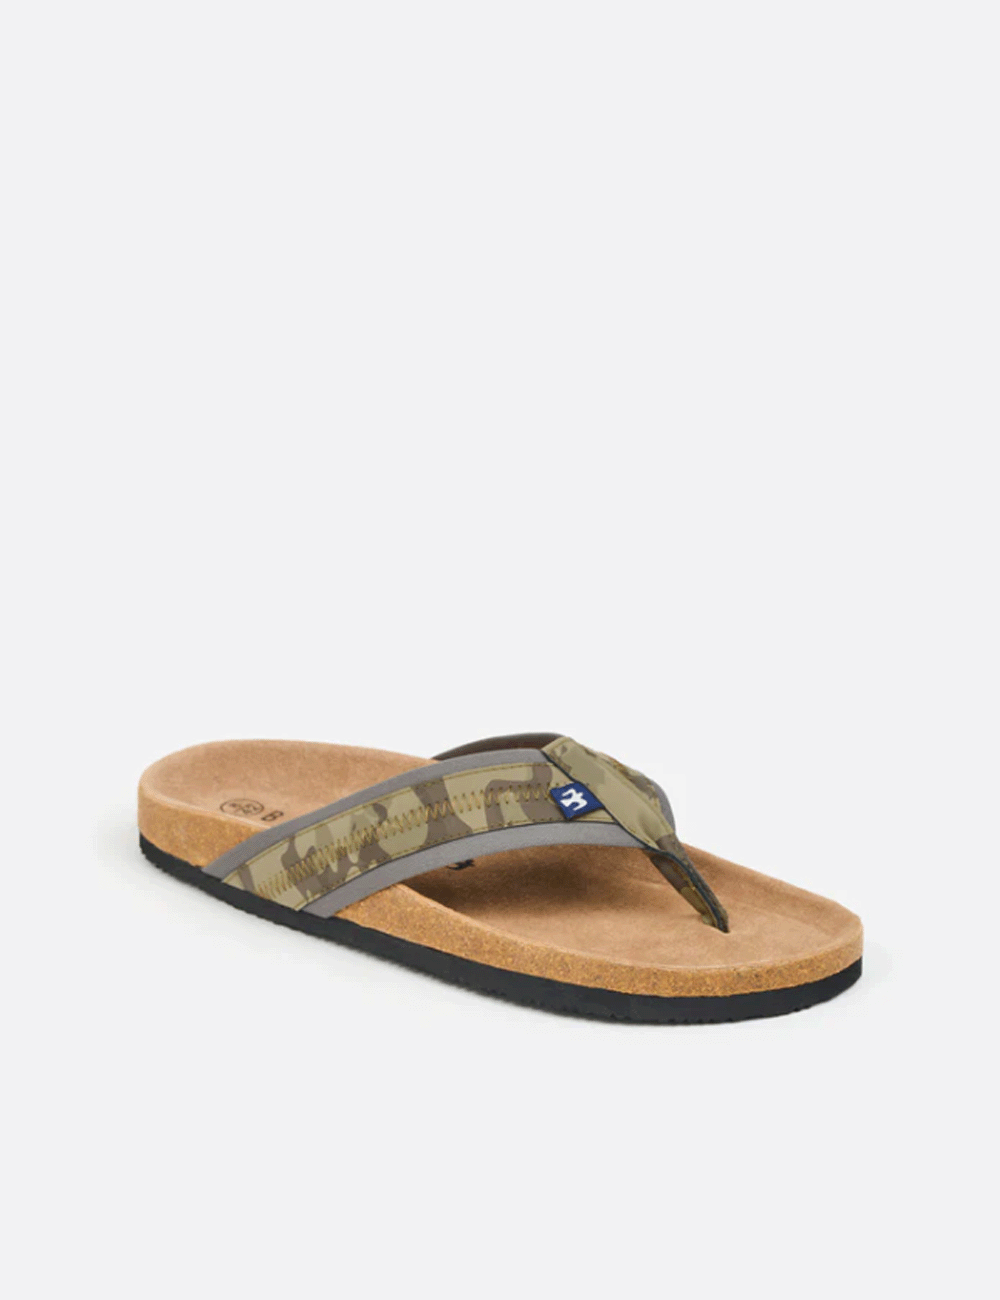 Right foot of Camo Flip Flops in Khaki on a grey background